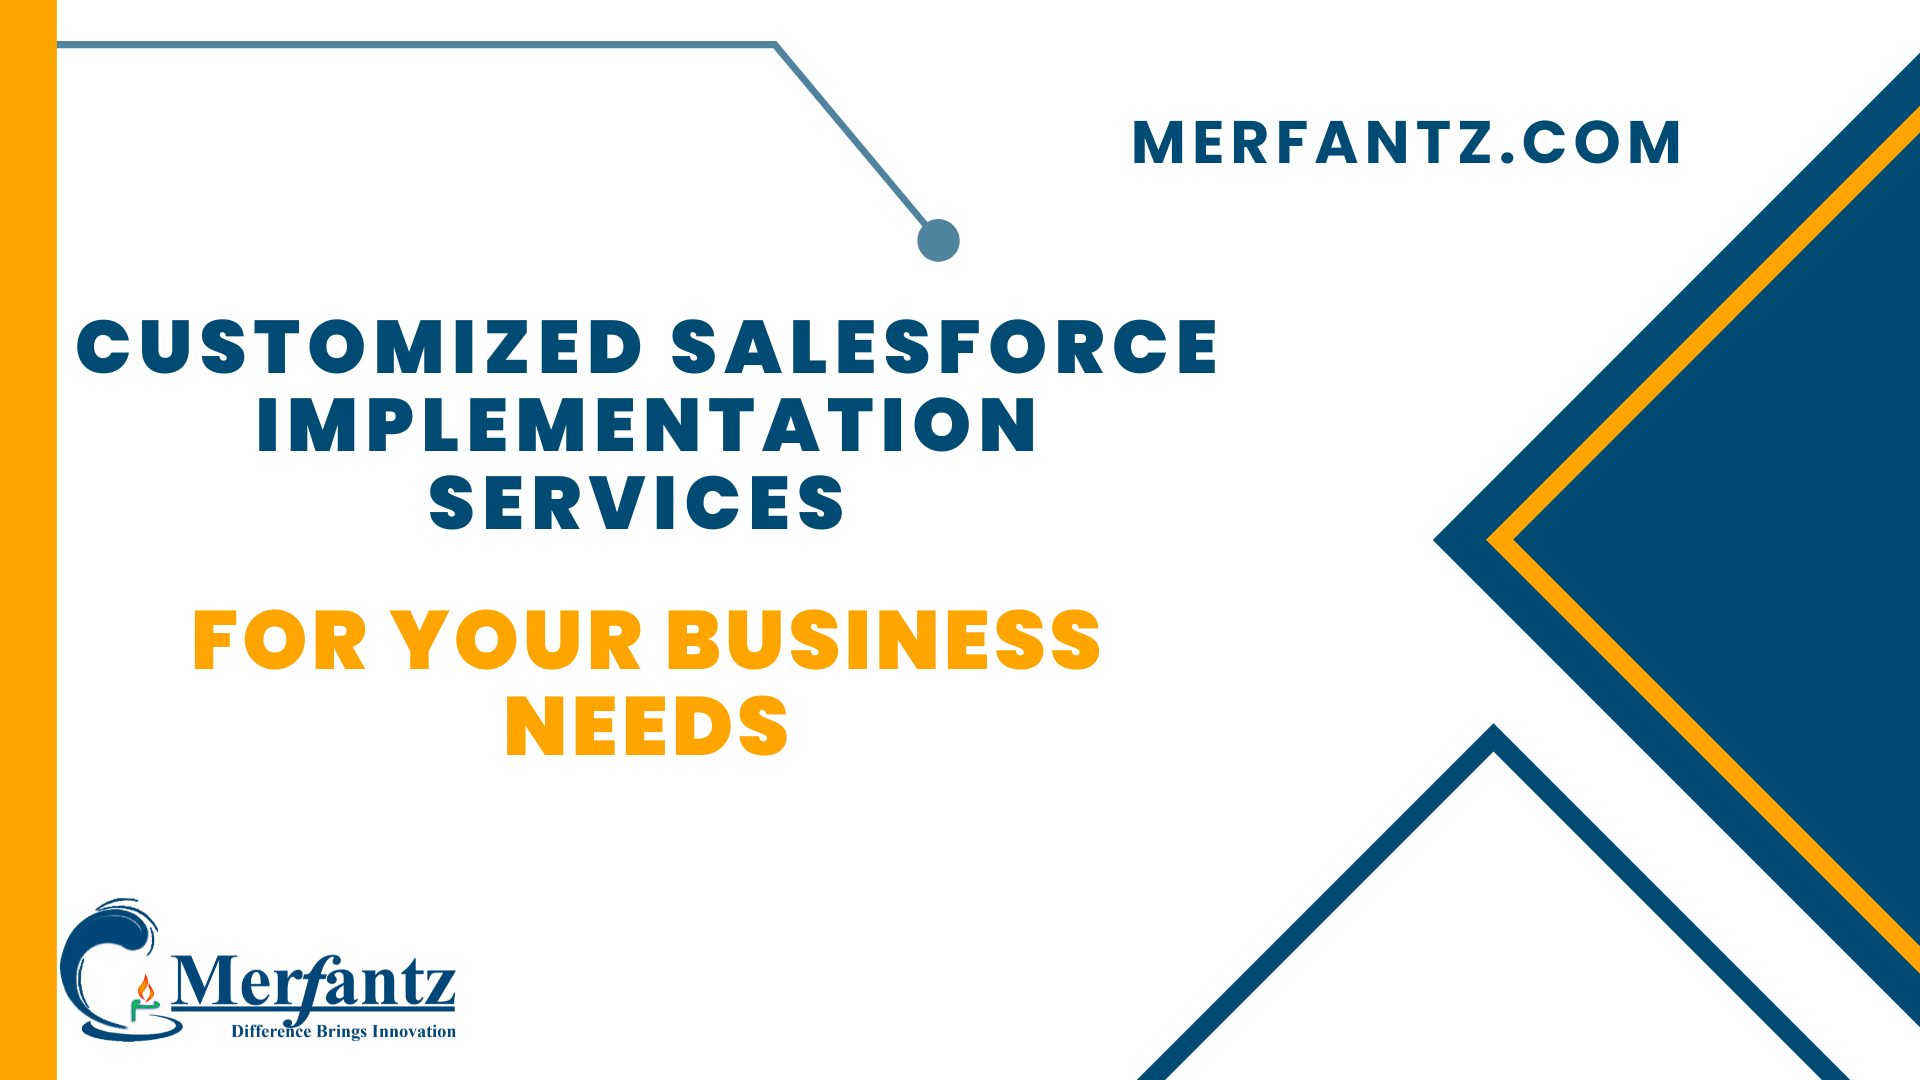 Customized Salesforce Implementation Services for Your Business Needs